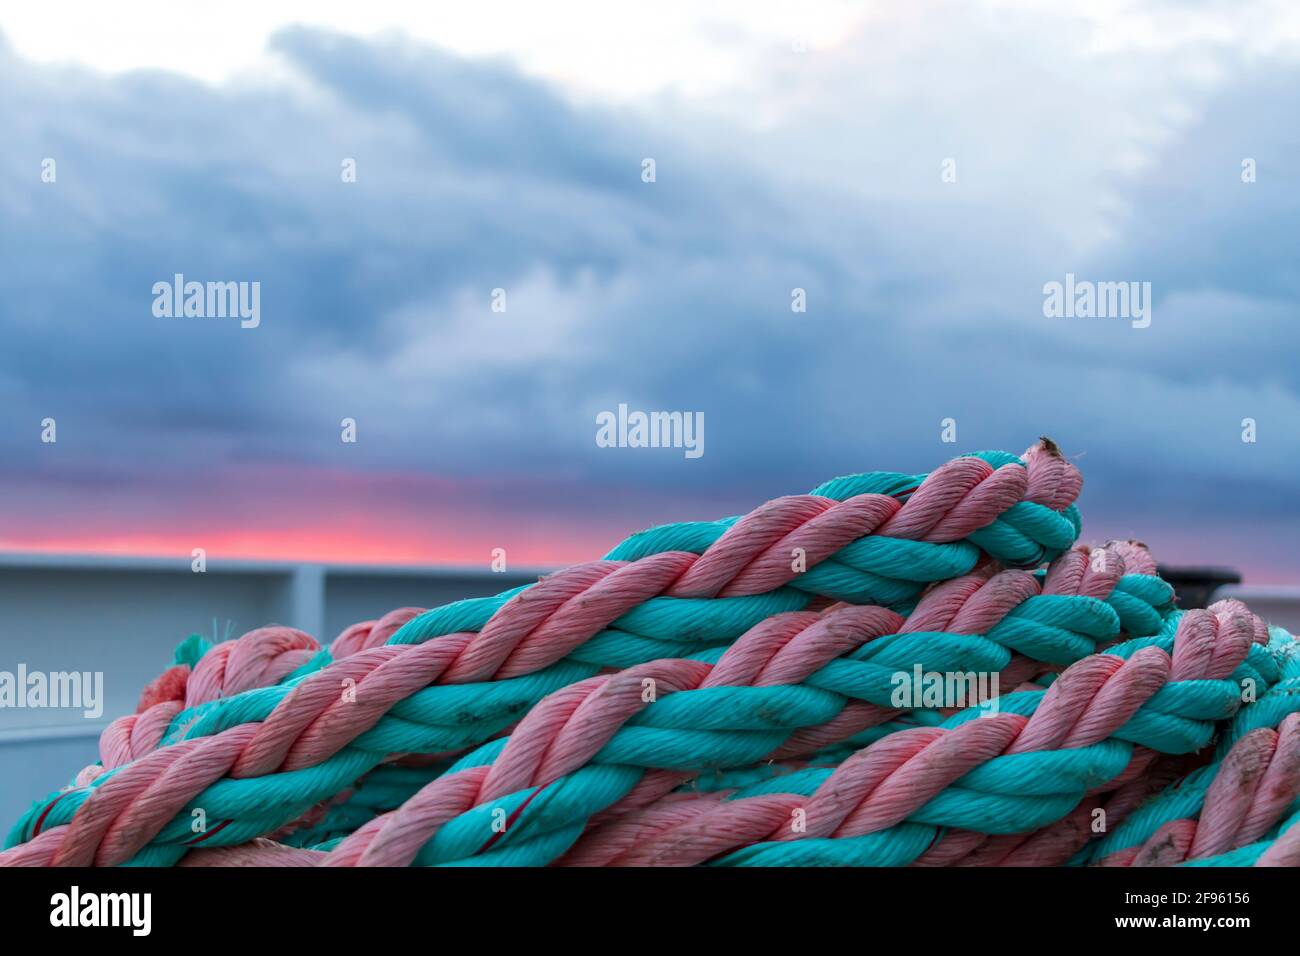 Nautical background. Colorful rope knot on the boat in beautiful moody light. Closeup of an old pink green frayed boat rope on sunrise with dramatic s Stock Photo